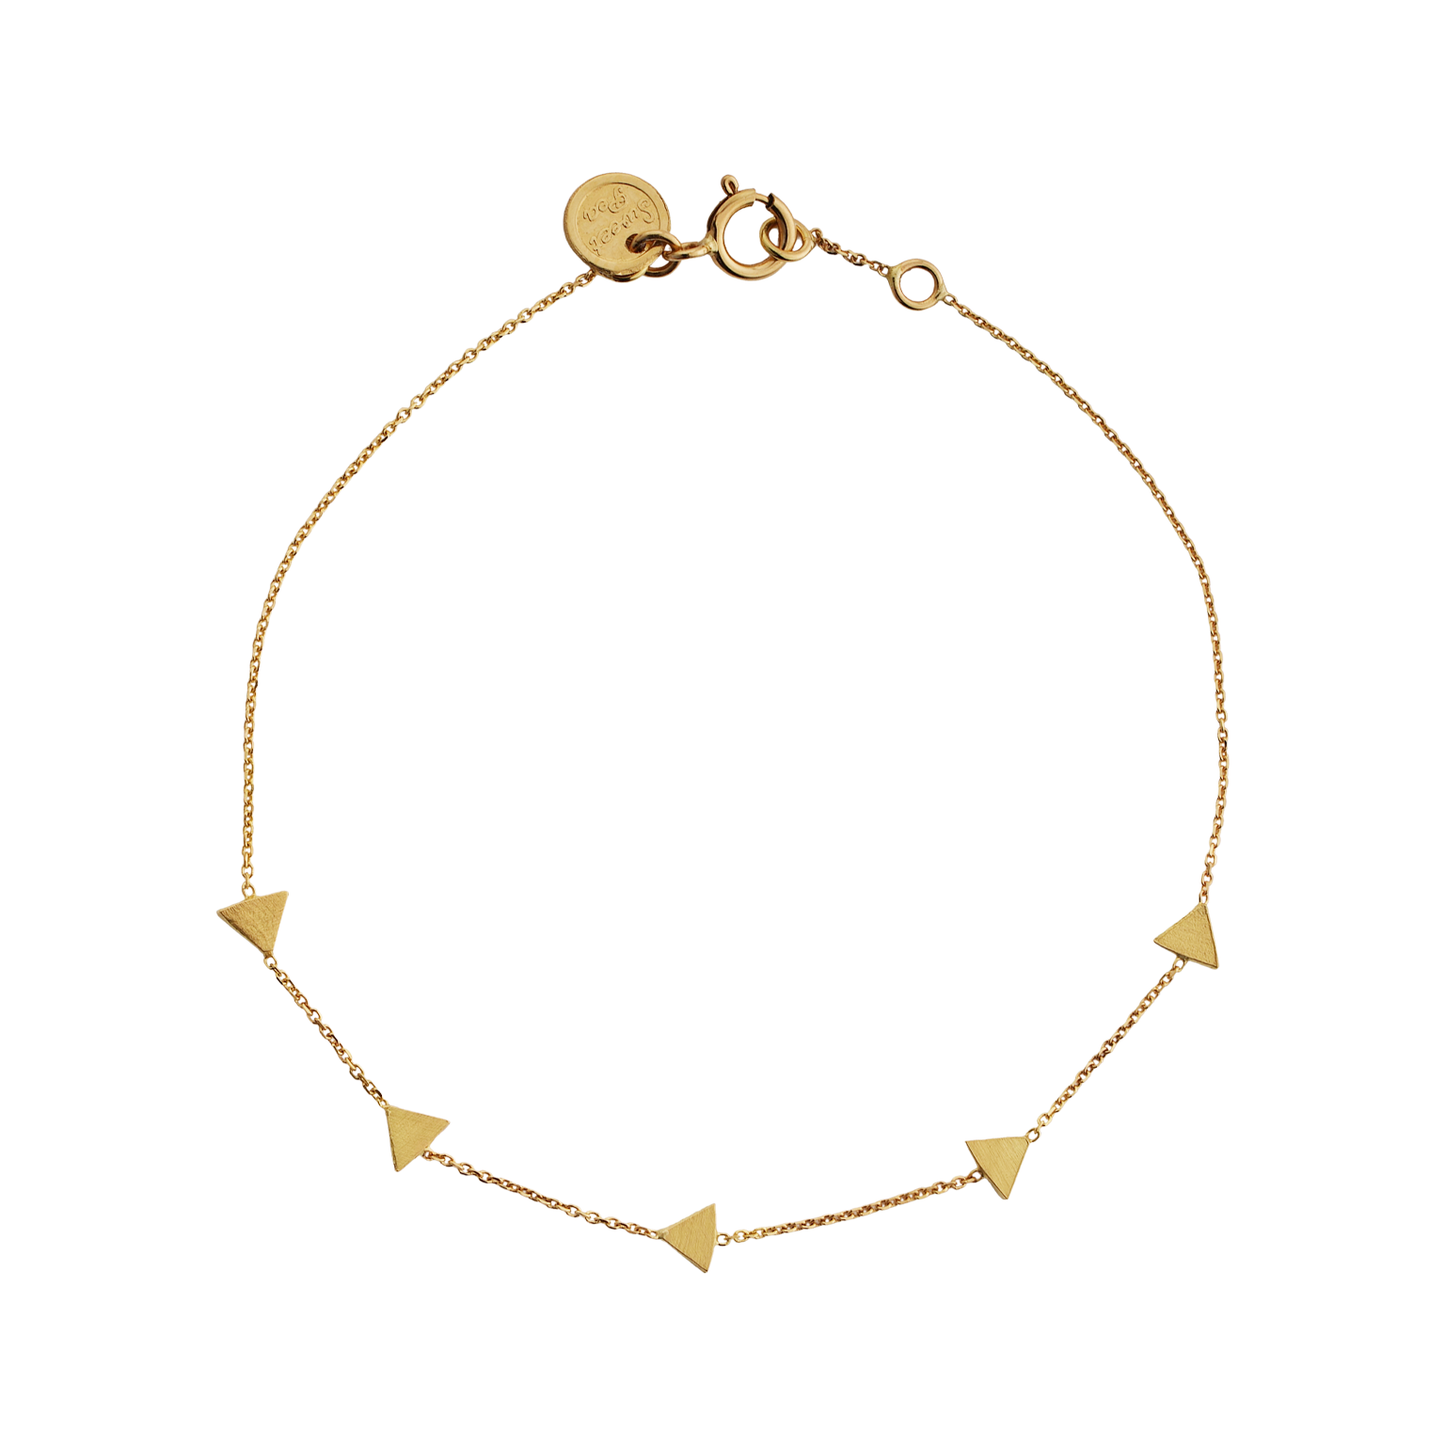 This 18ct yellow gold fine chain bracelet with 5 inserted brushed arrow elements